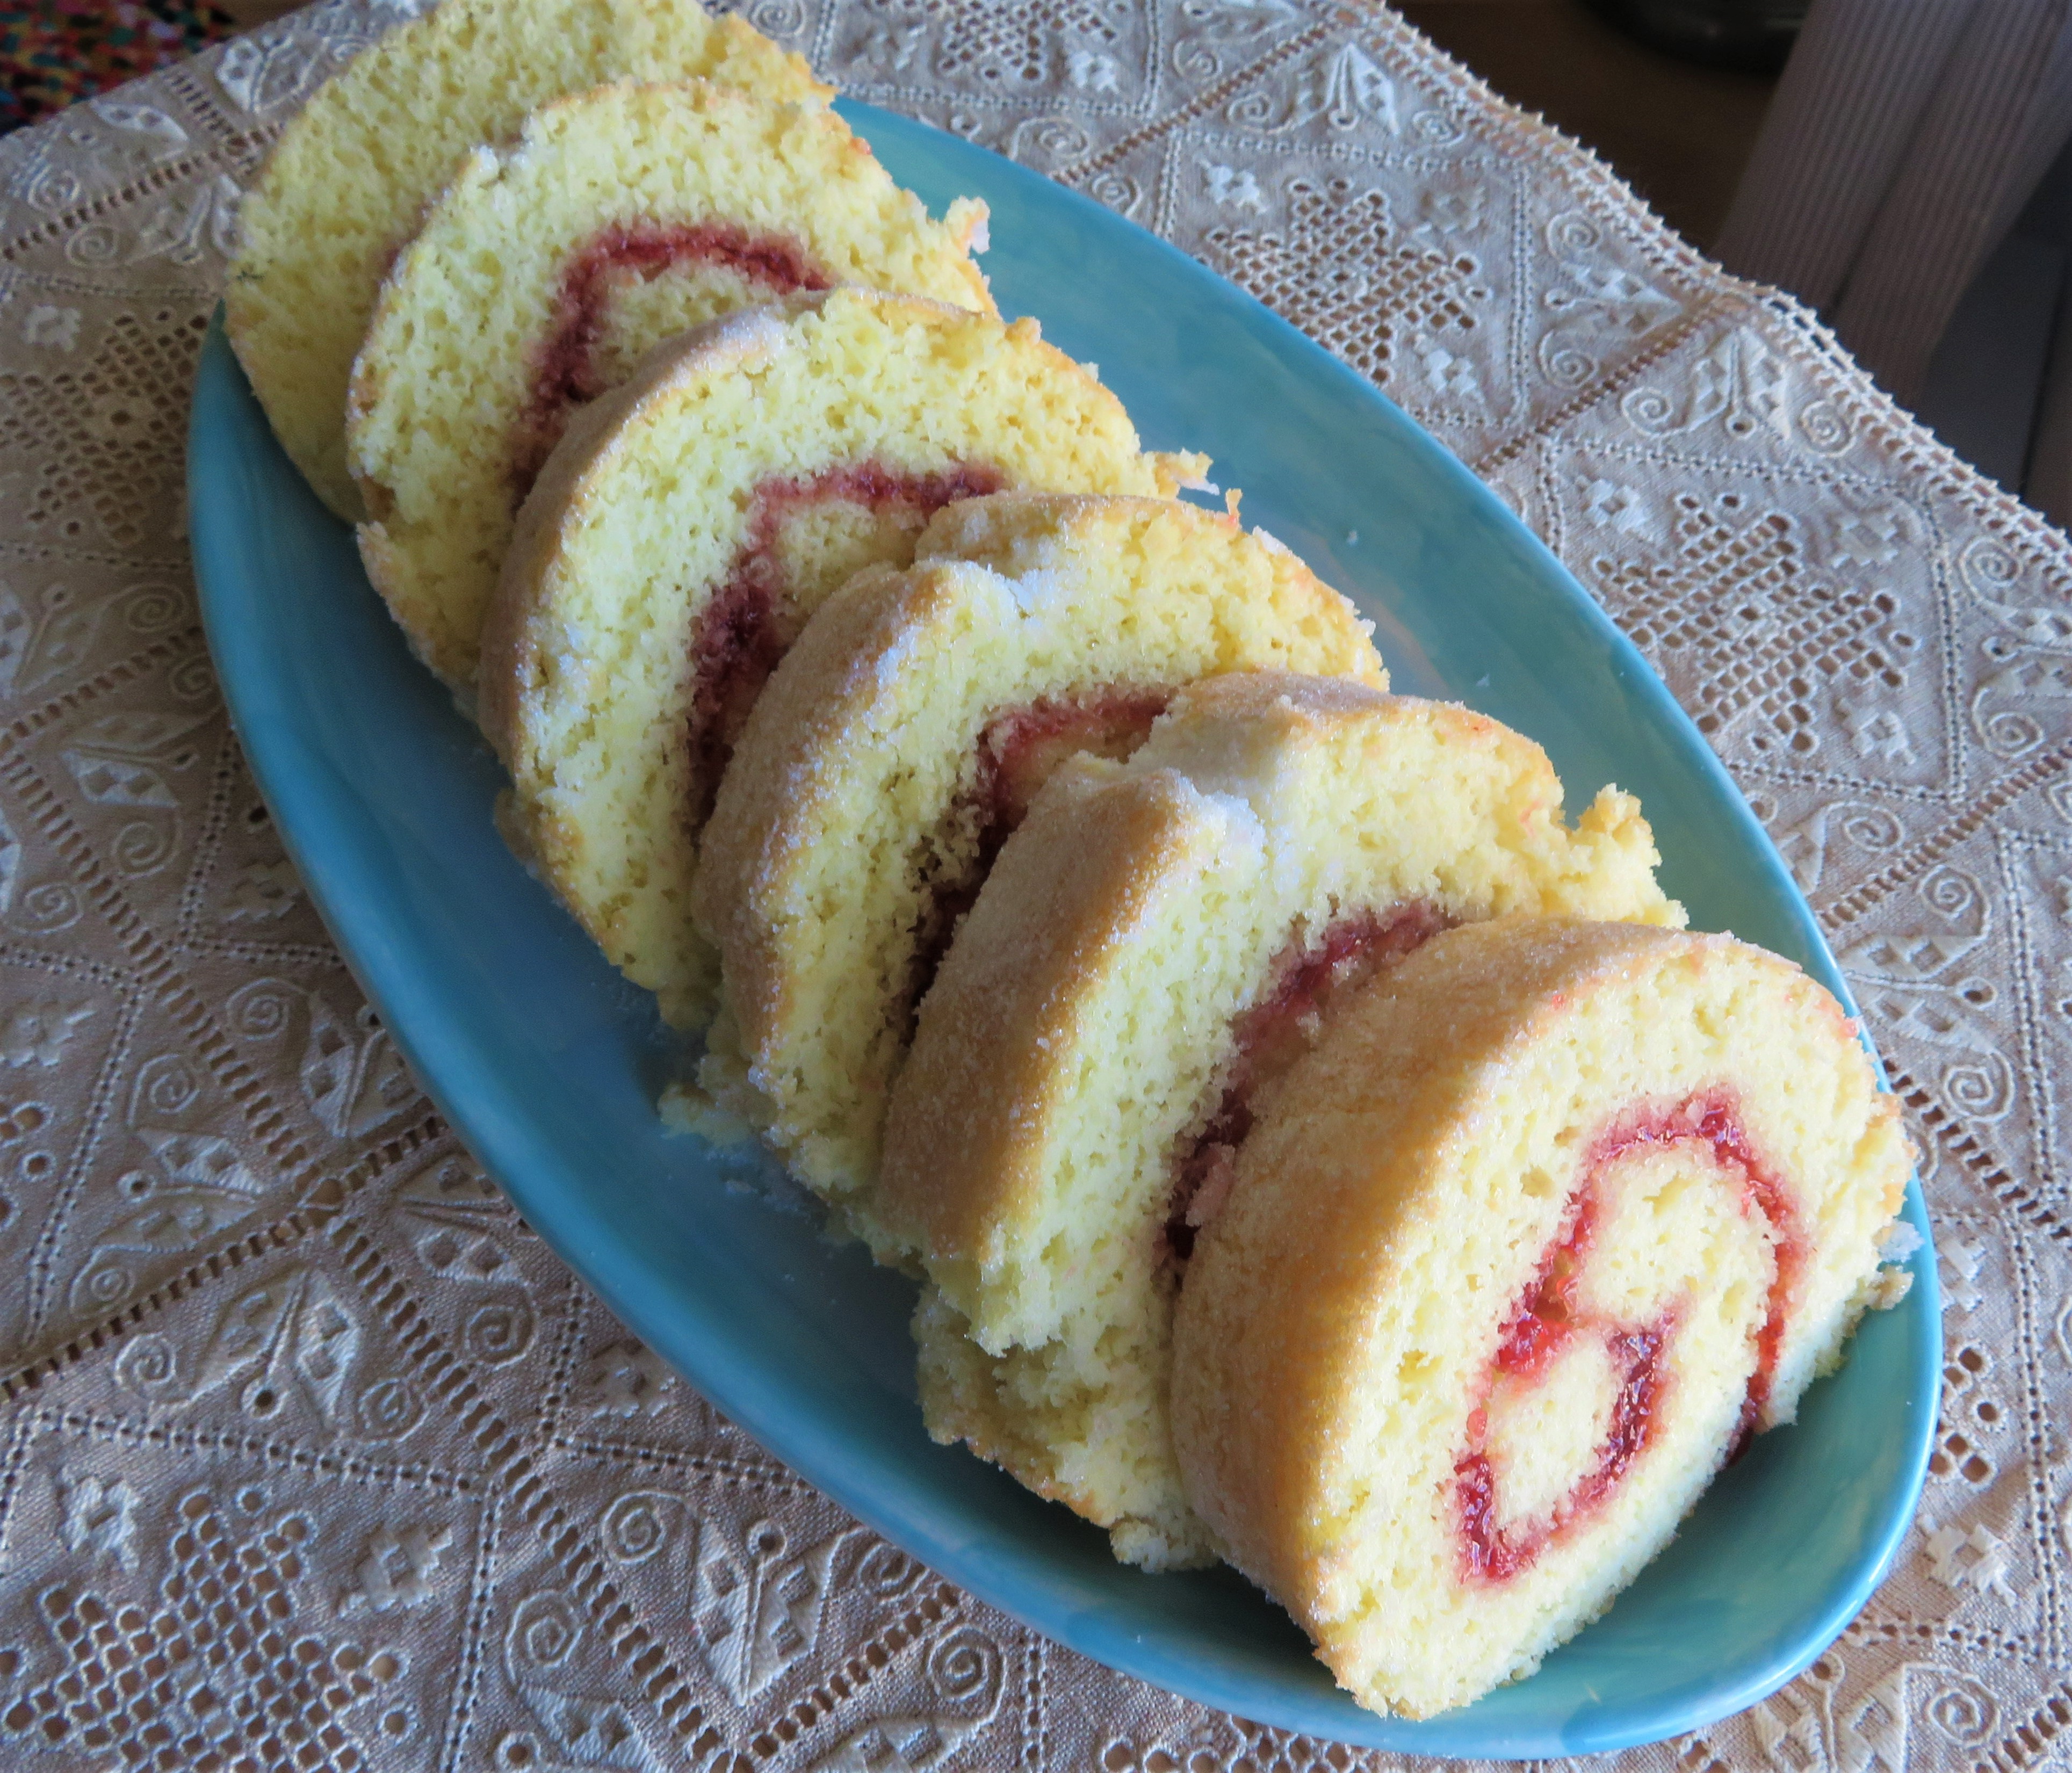 JELLY ROLL PAN / SWISS ROLL / ROULADE BAKING PAN